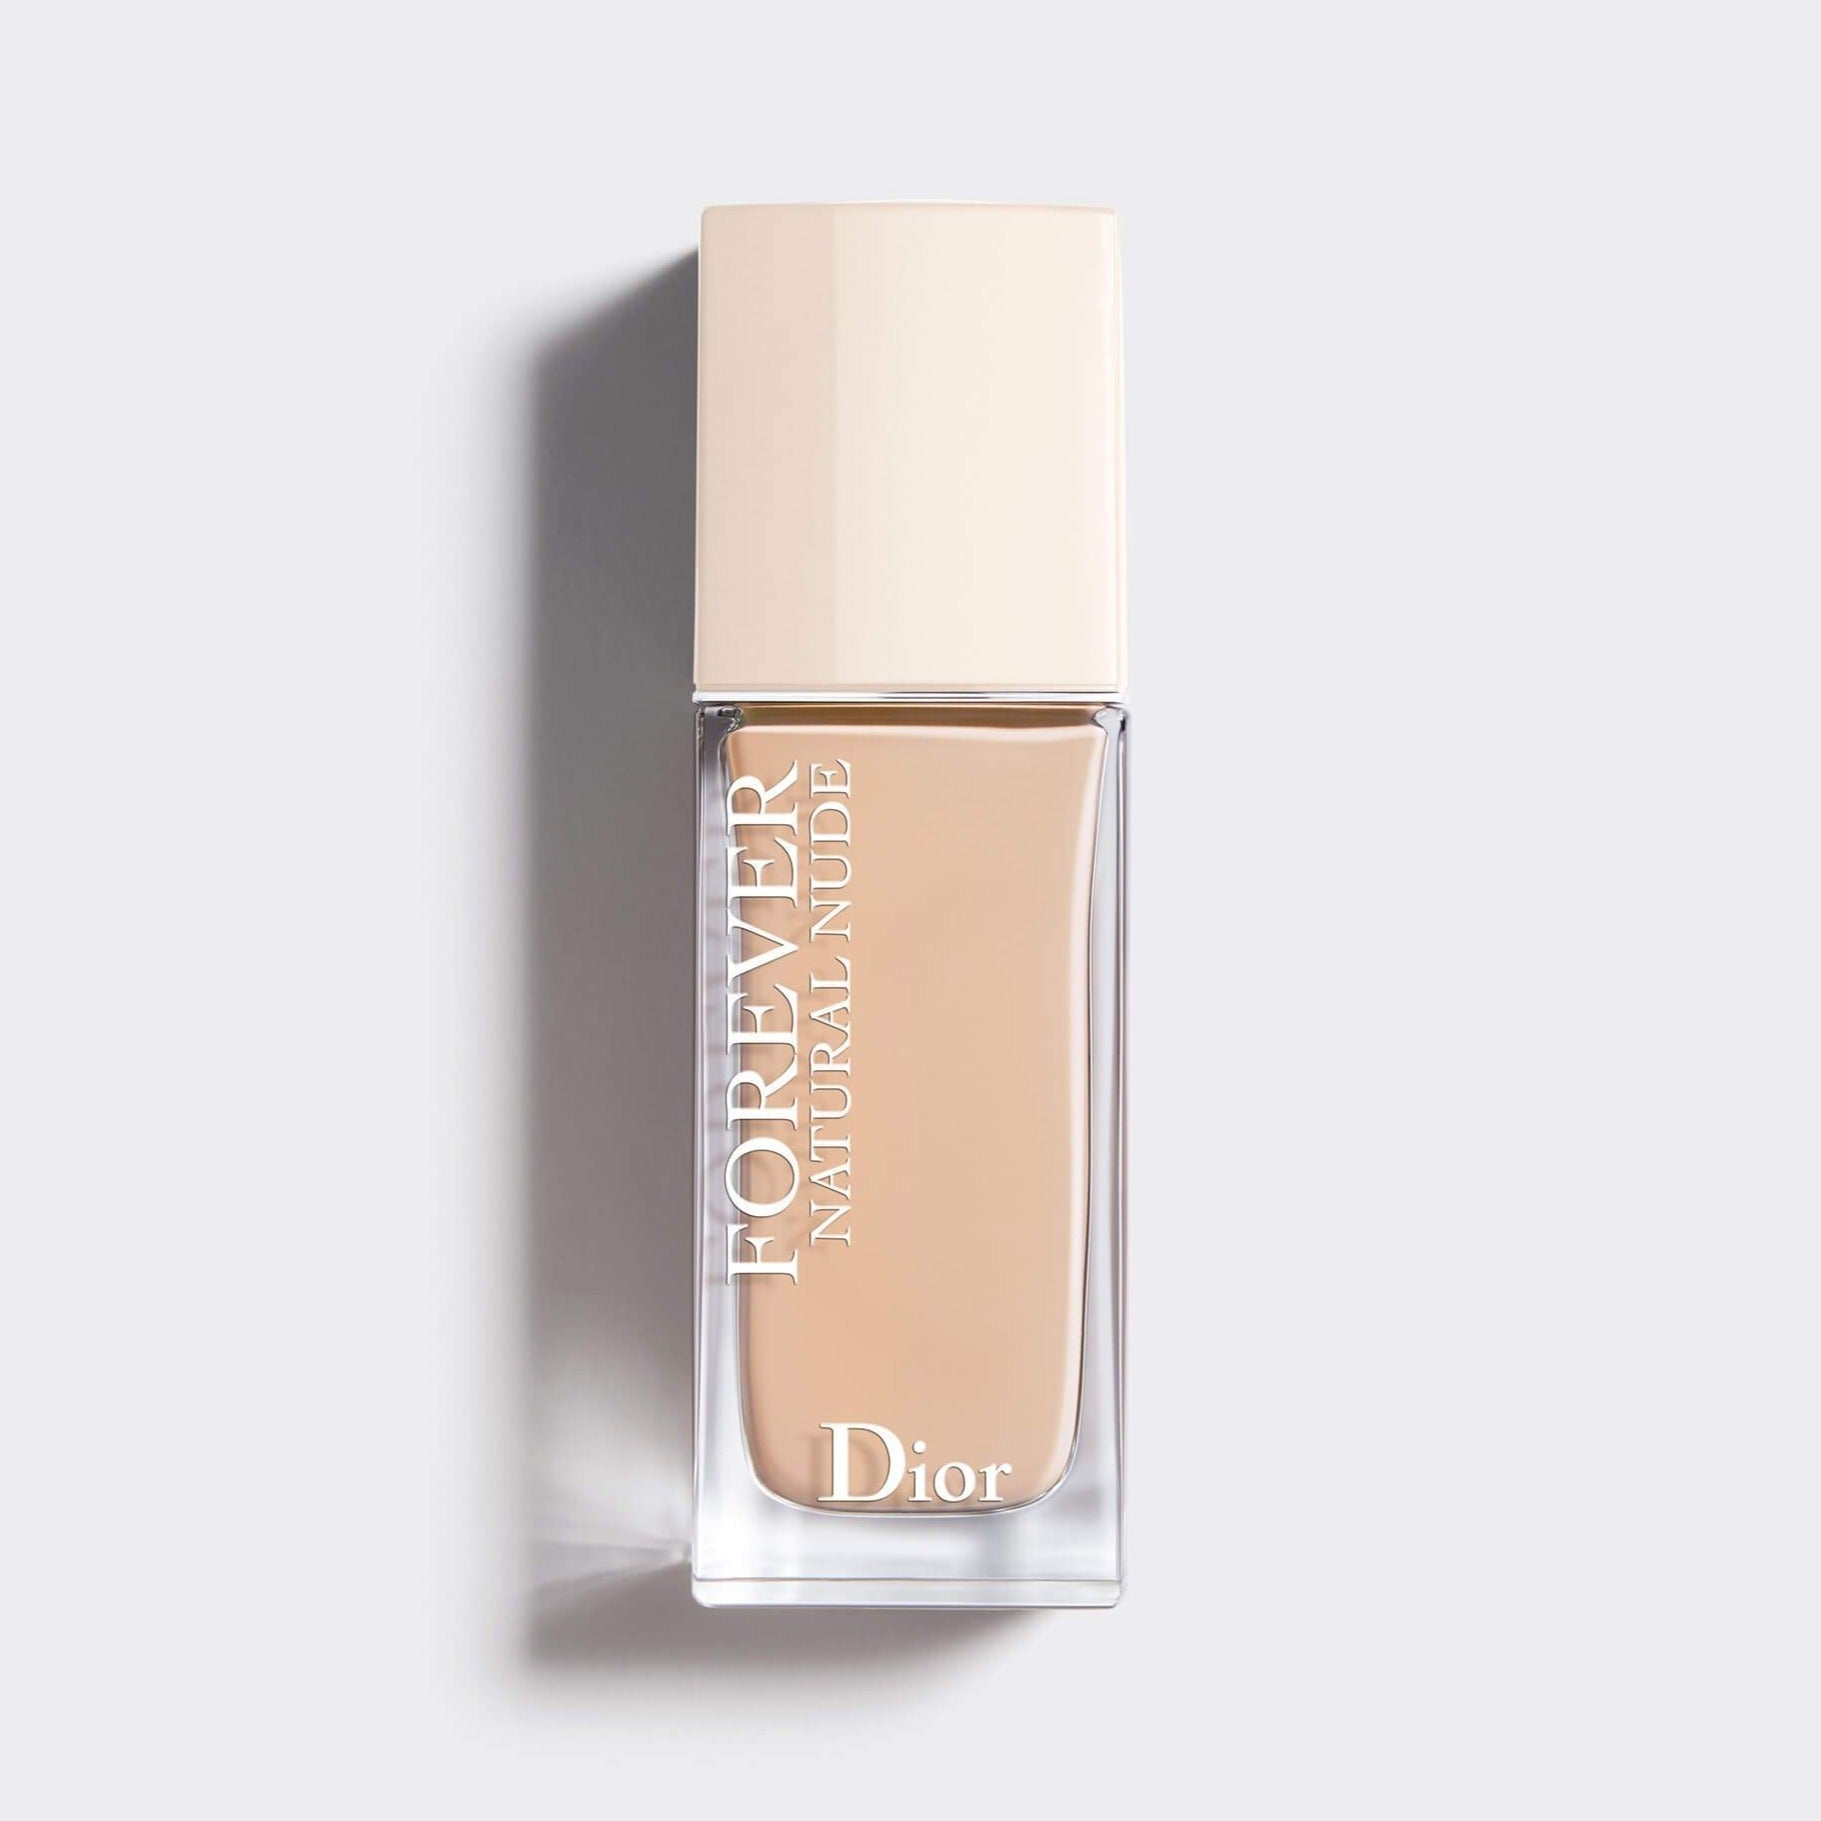 DIOR FOREVER NATURAL NUDE LONGWEAR FOUNDATION | 24h* wear natural complexion - 96%** ingredients of natural origin